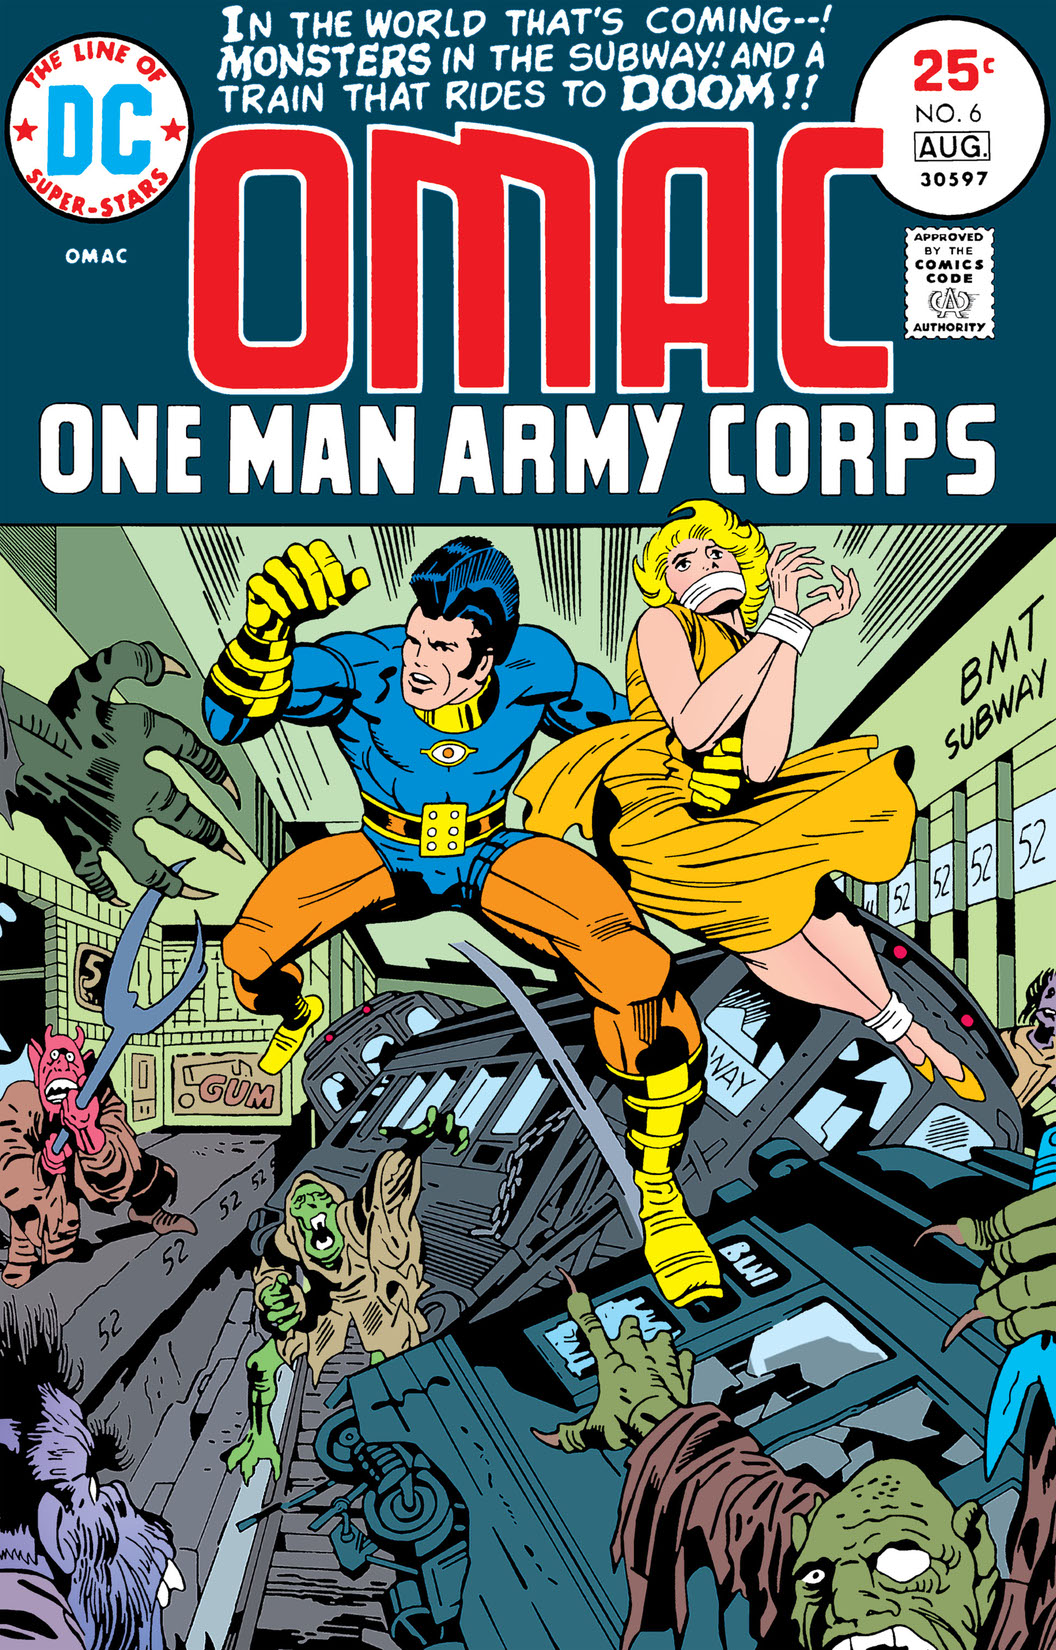 O.M.A.C. (1974-) #6 preview images